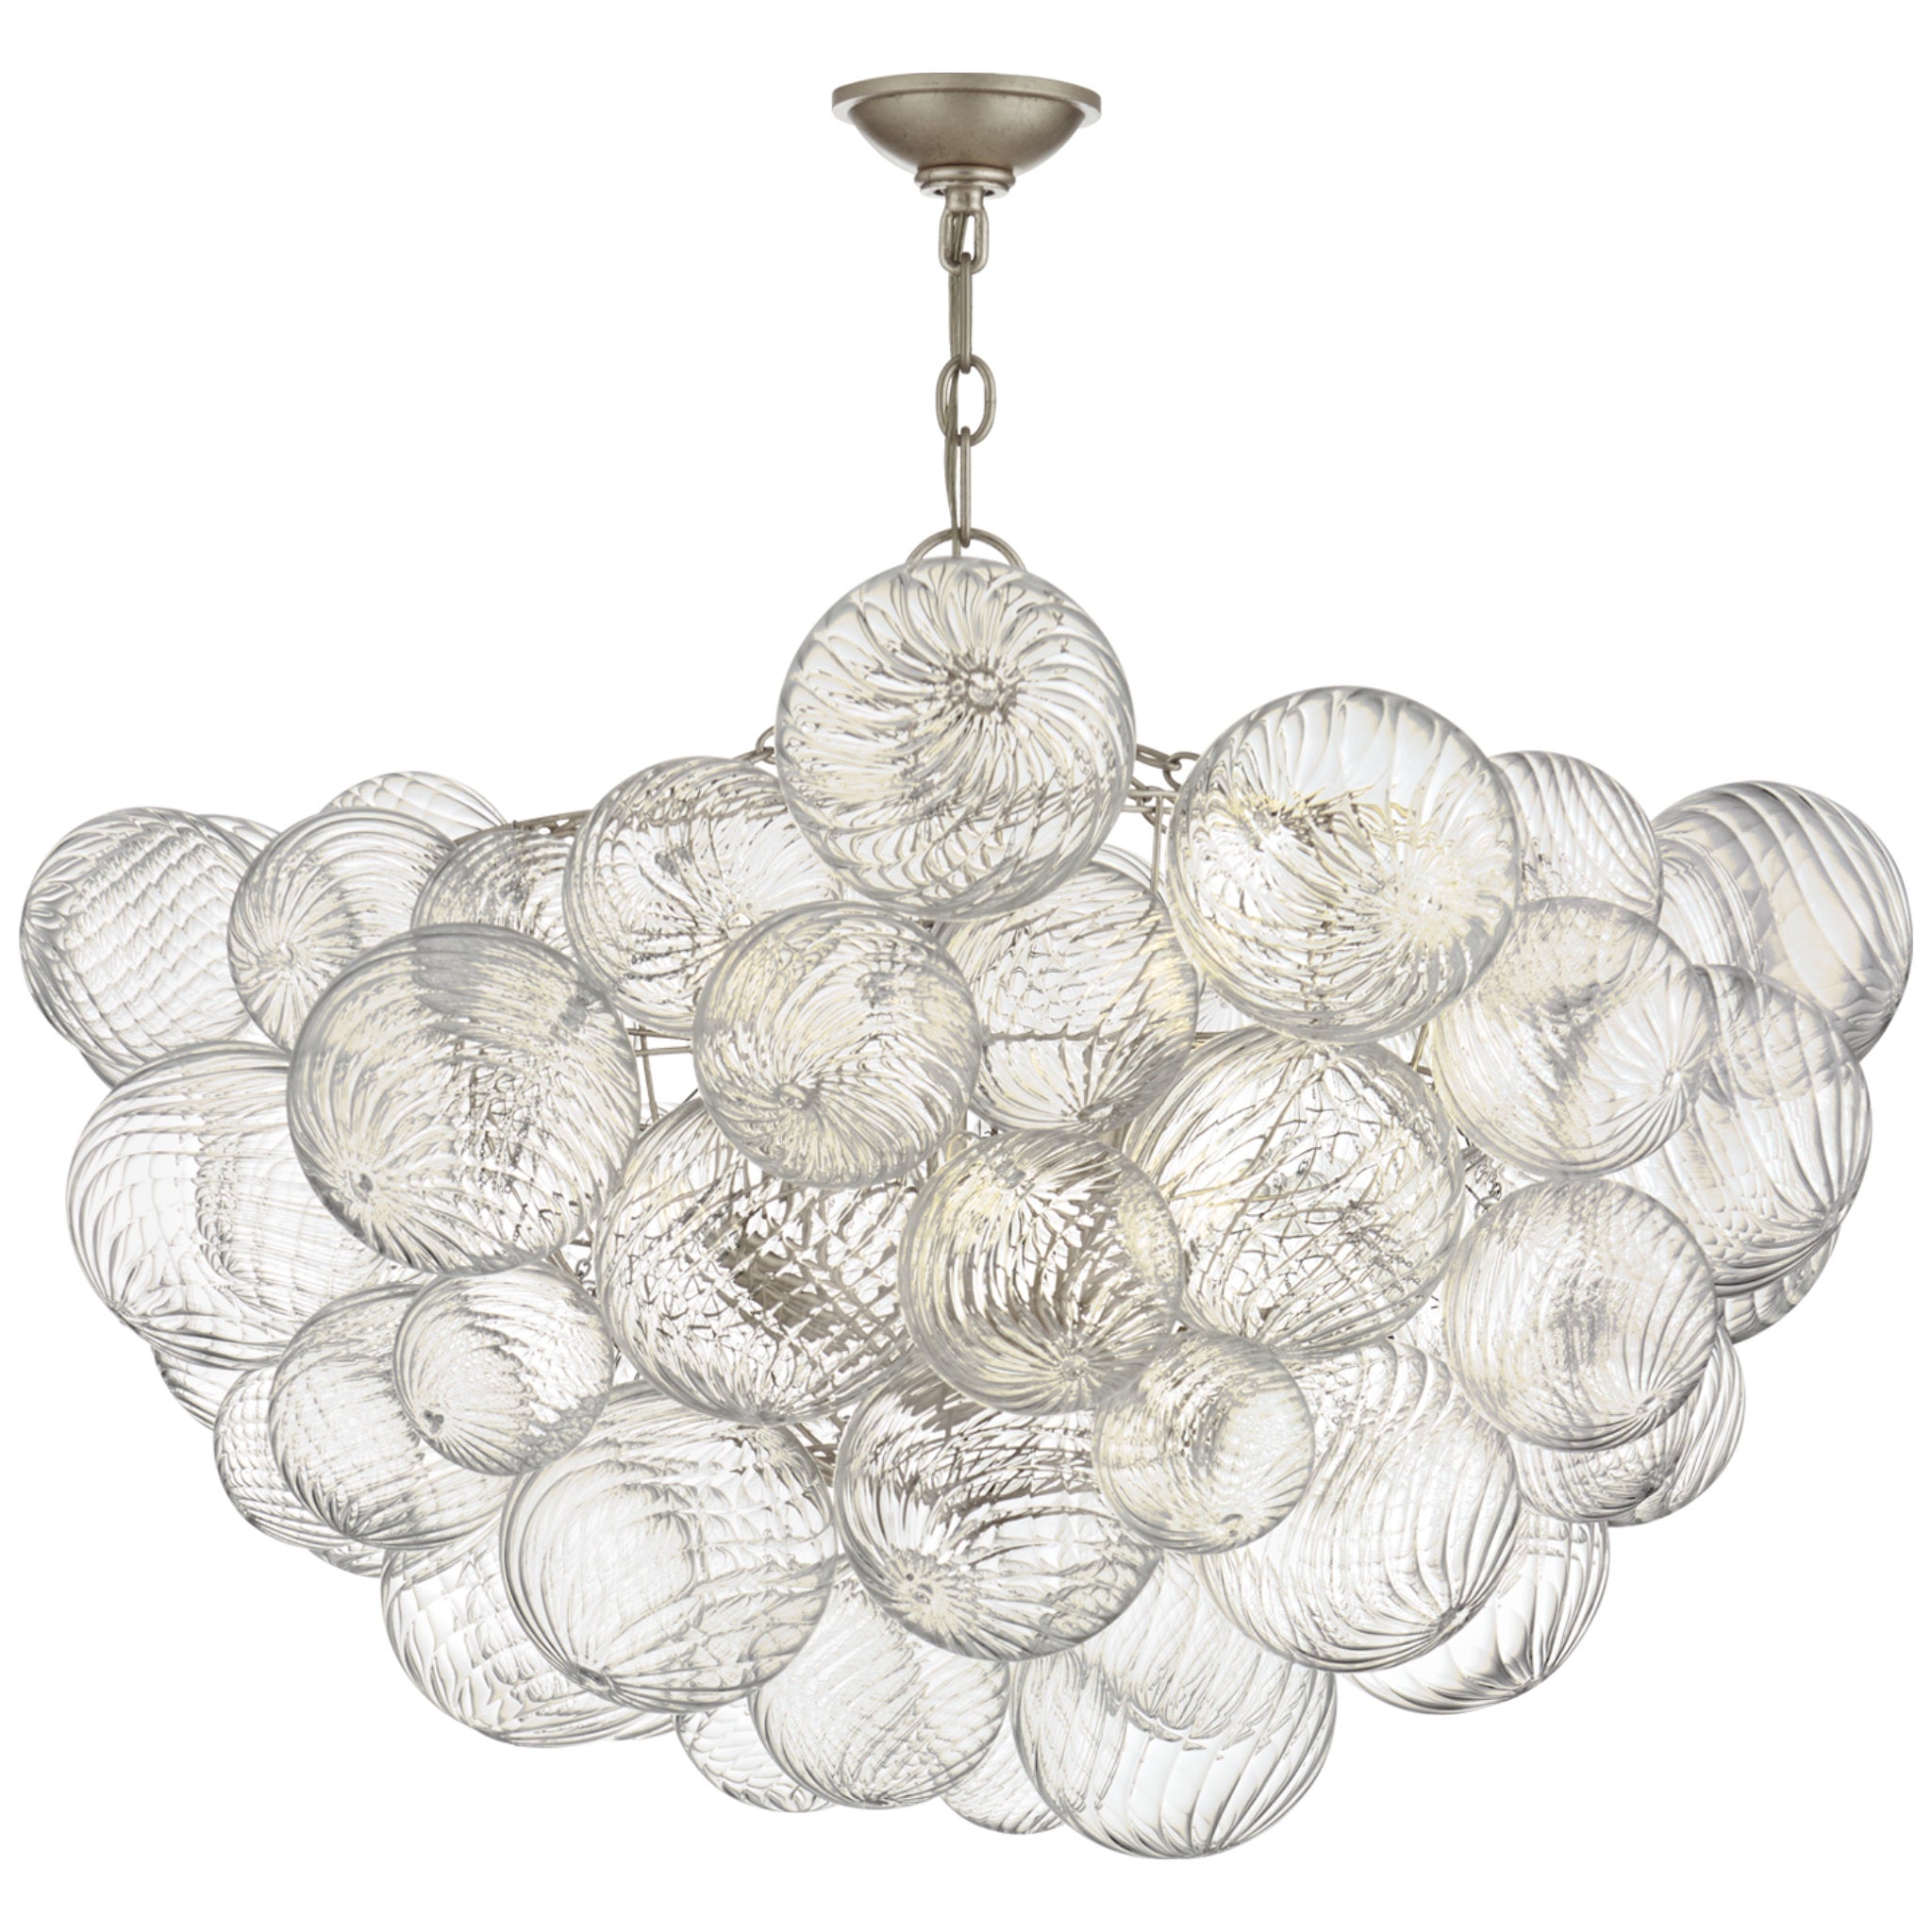 Julie Neill Talia Large Chandelier in Burnished Silver Leaf and Clear